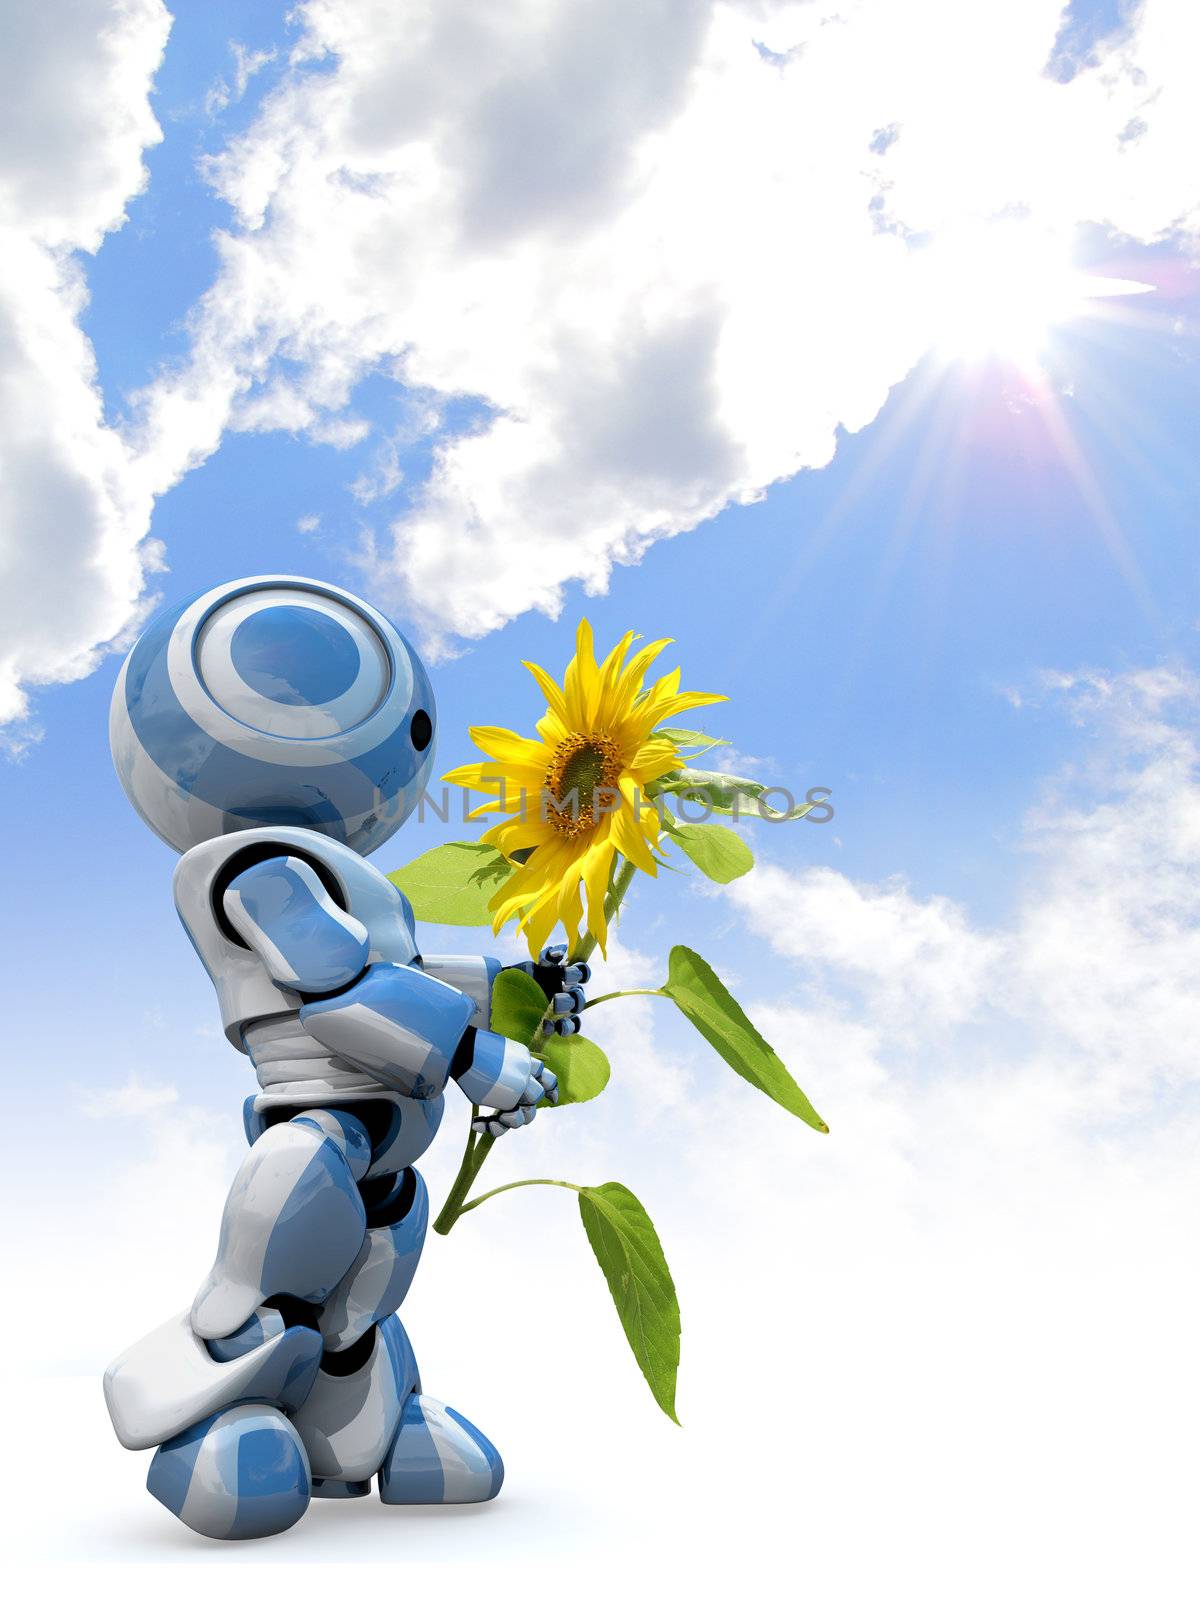 Glossy 3d Robot Holding Flower Blue Sky Clouds by LeoBlanchette